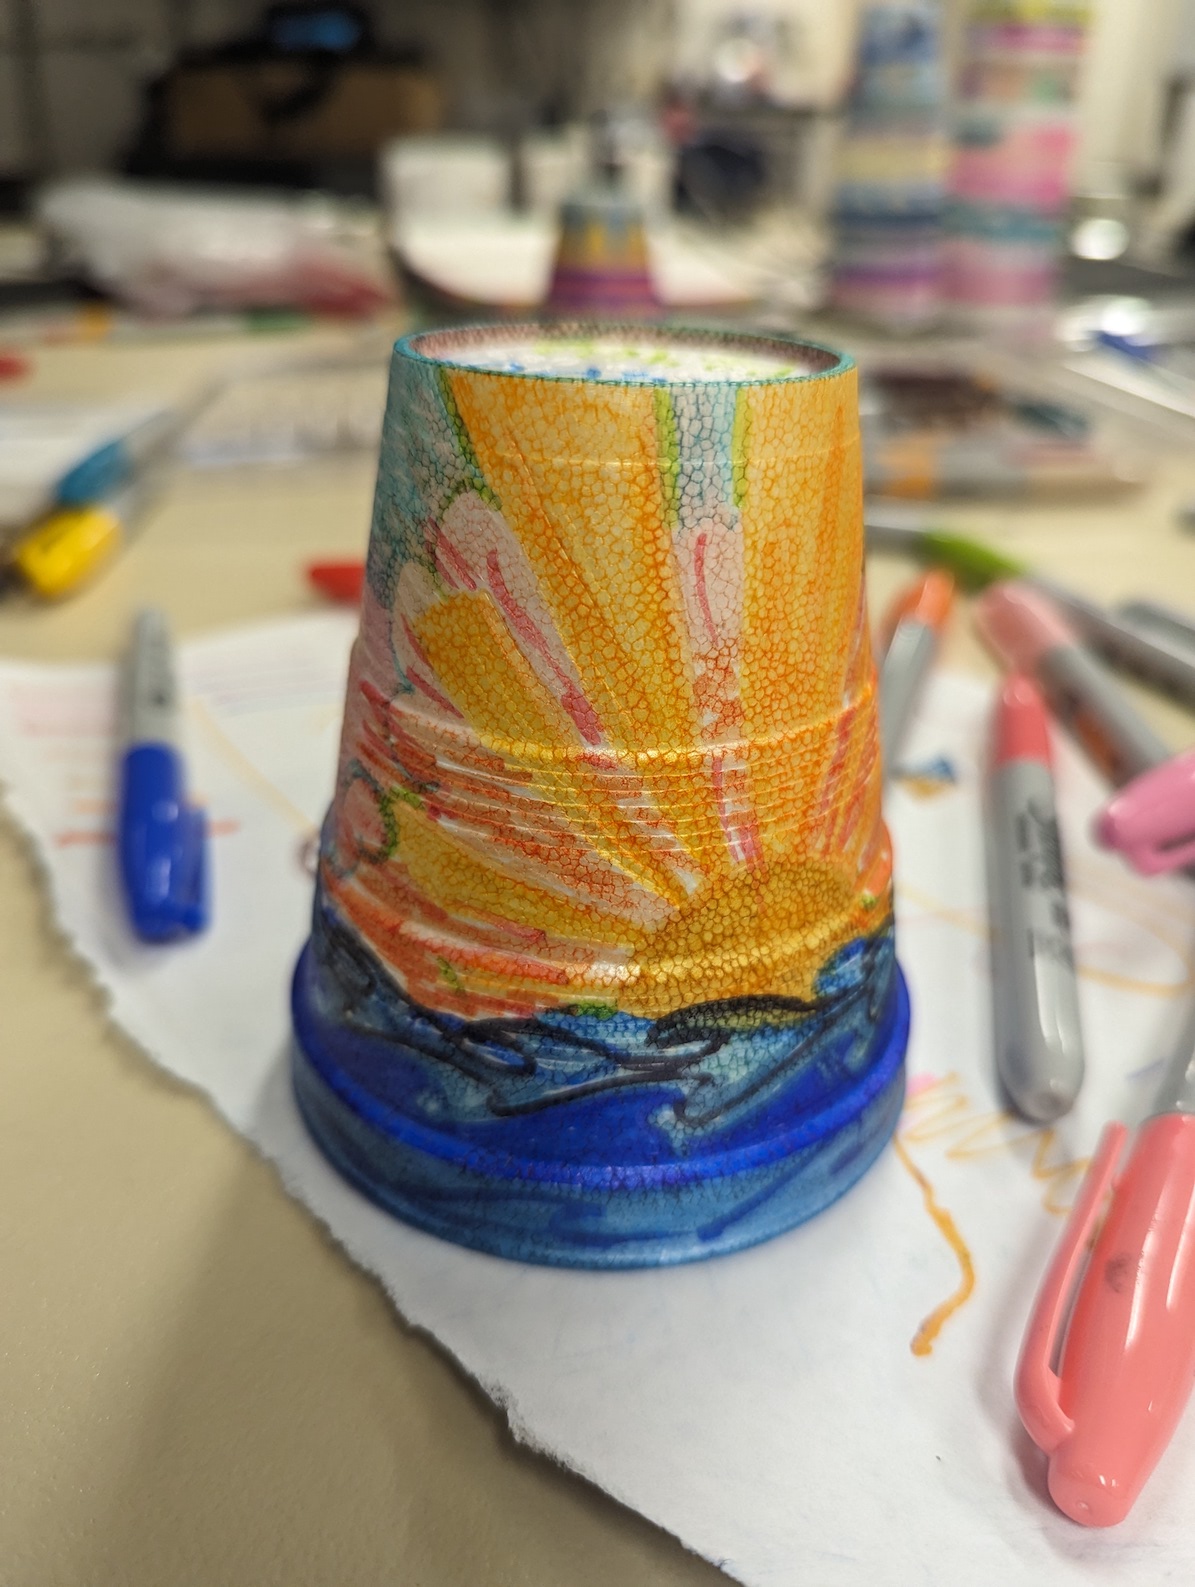 sunset drawn on styrofoam cup, more cups and art supplies in background of photo